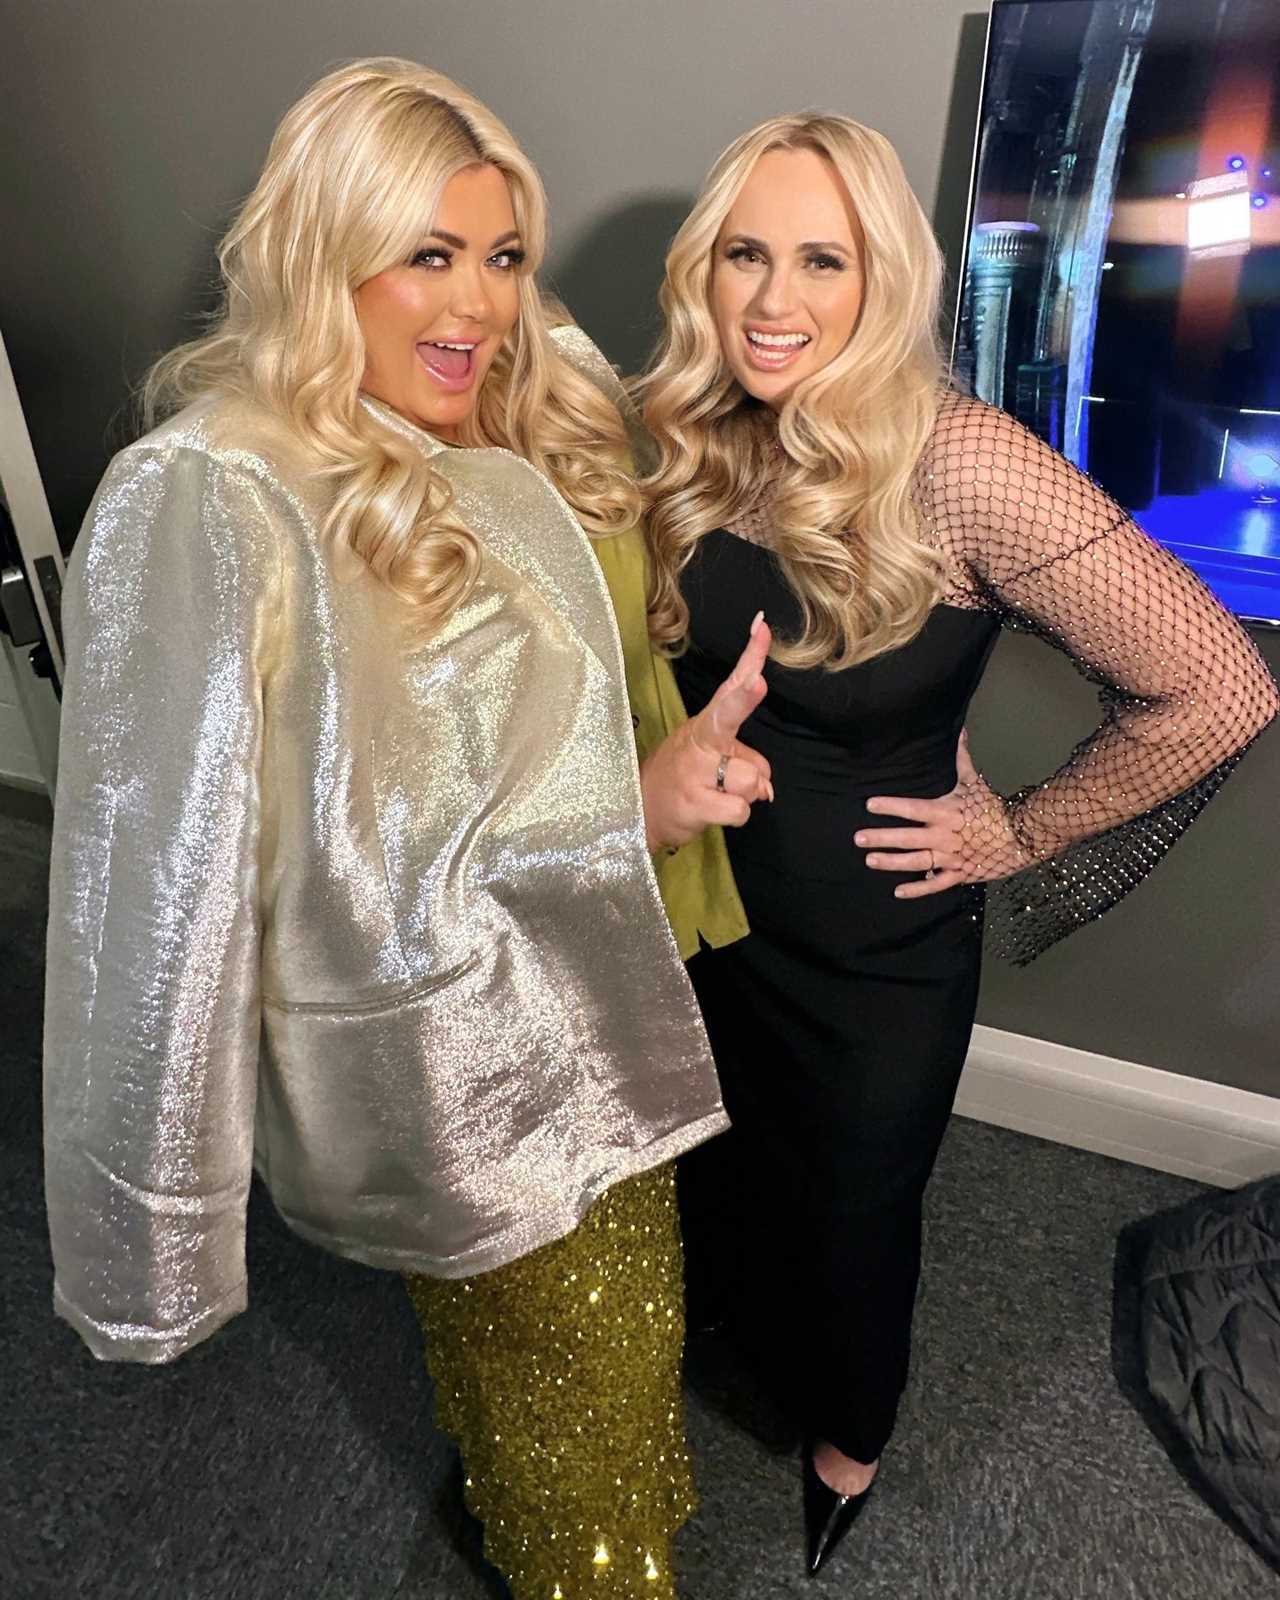 Gemma Collins Reveals Unexpected Friendship with A-list Actress